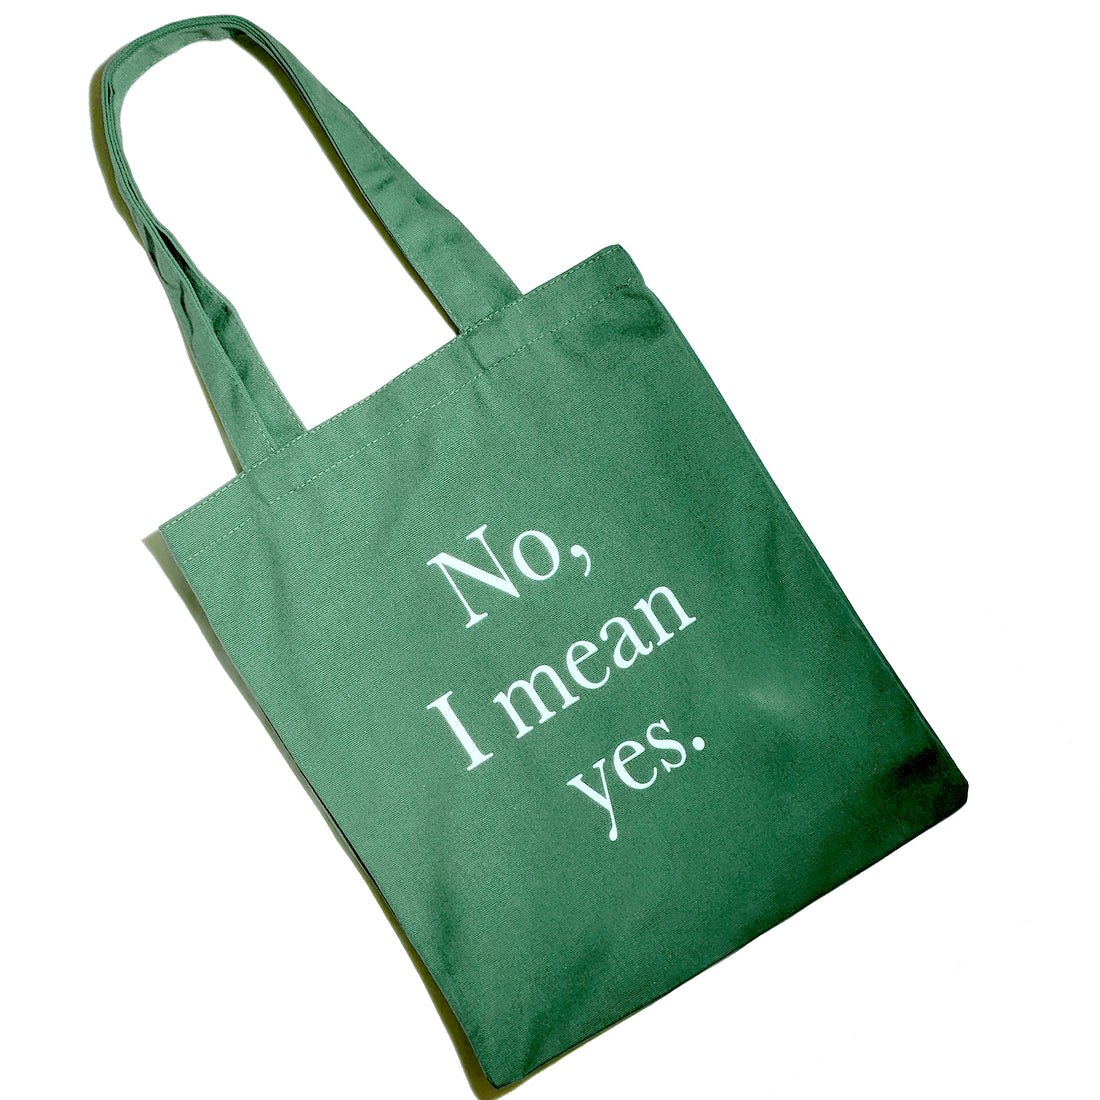 Yes I Mean No • Green/ Tote Bag